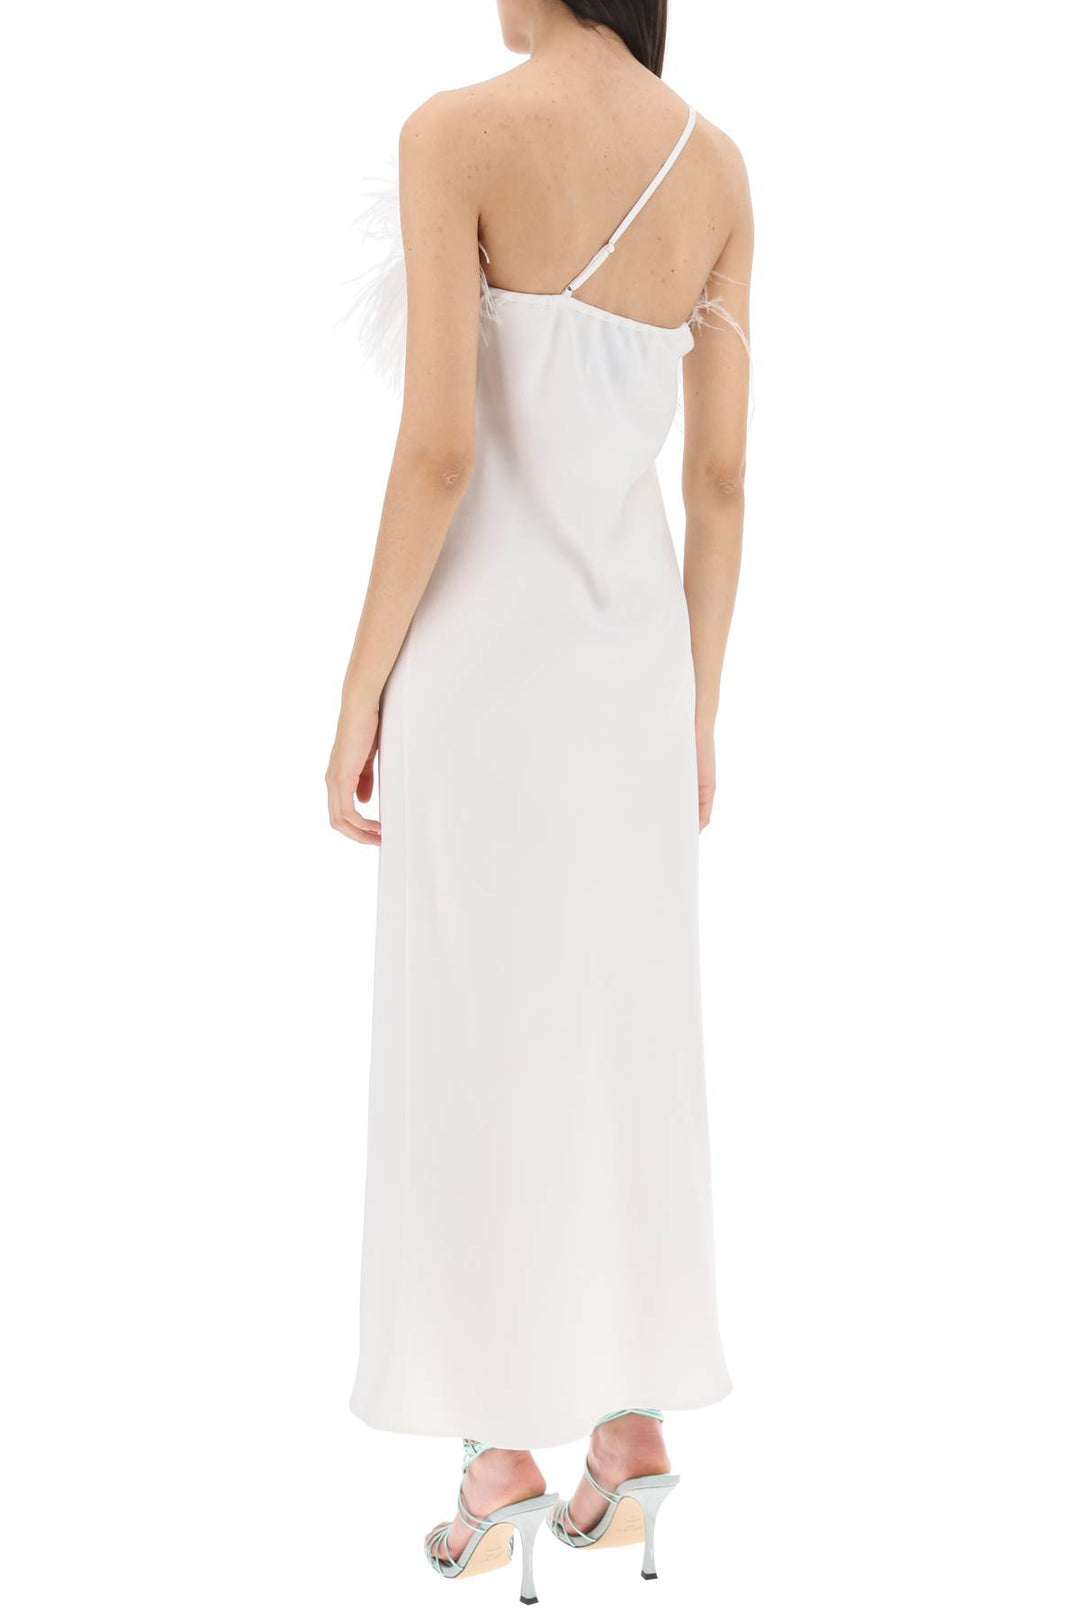 Art Dealer 'Ember' Maxi Dress In Satin With Feathers   Bianco